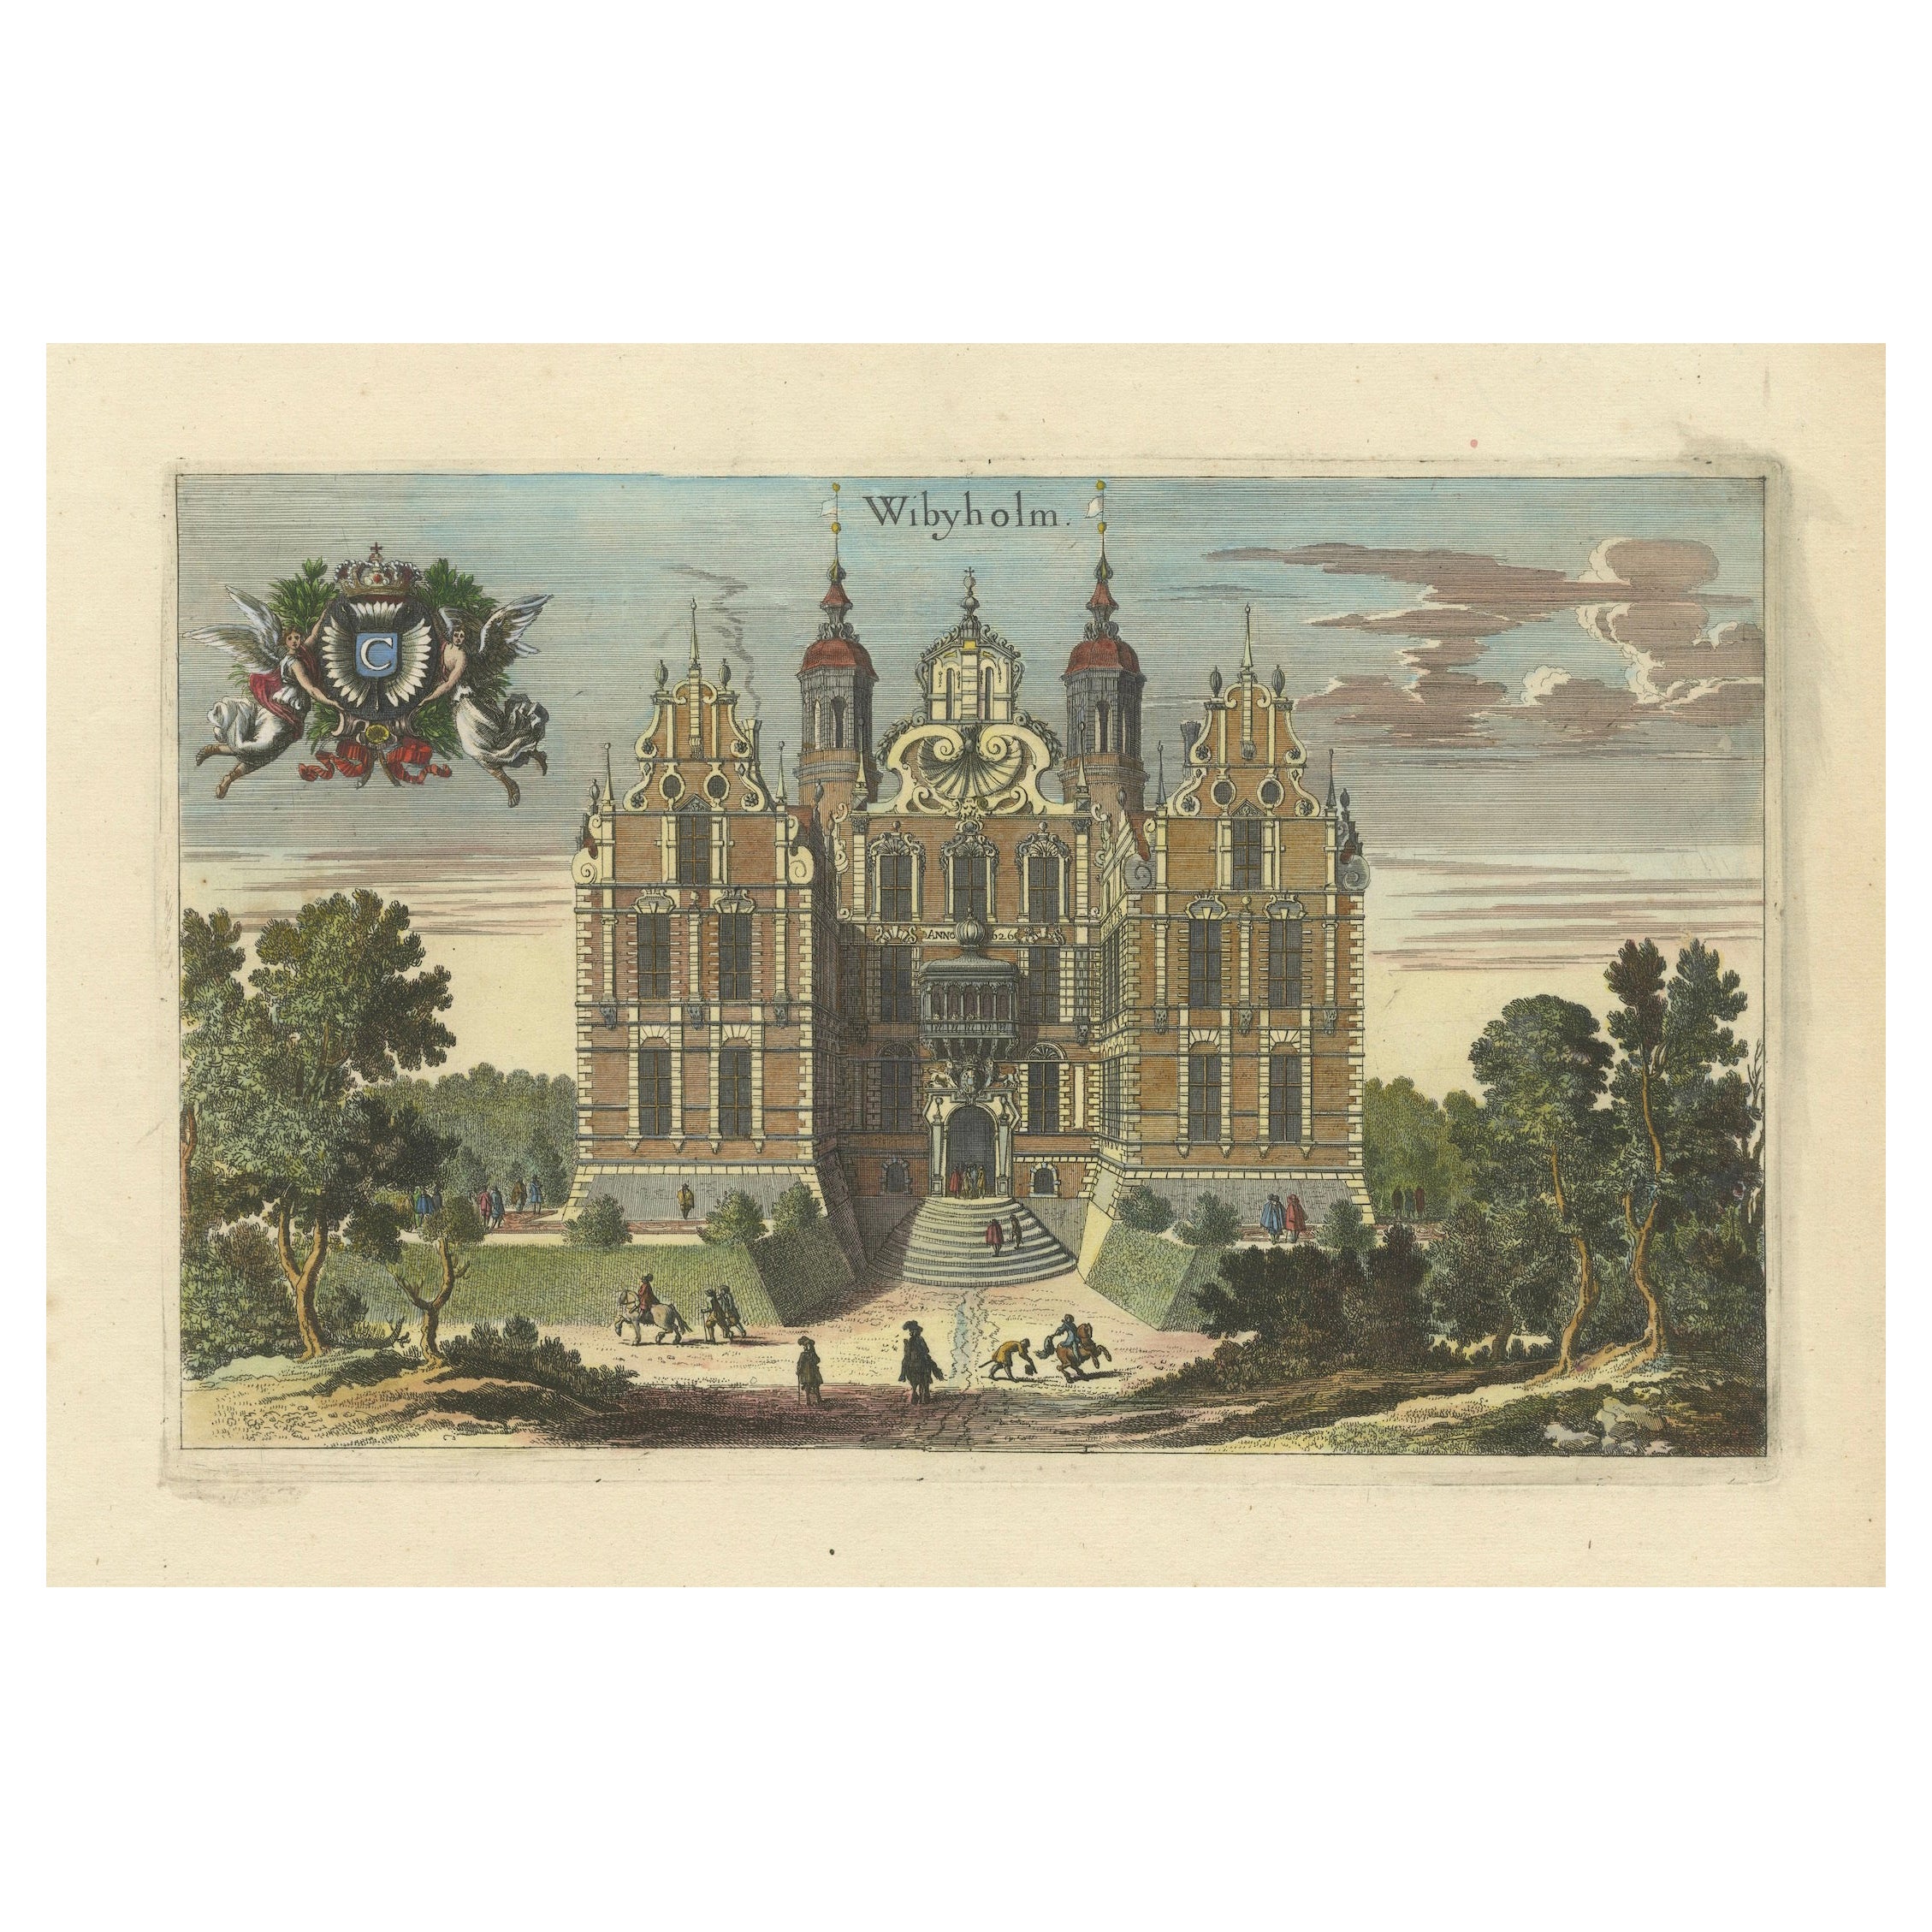 Vibyholm Castle in Sweden: A Baroque Gem in Dahlbergh's Collection, ca.1675